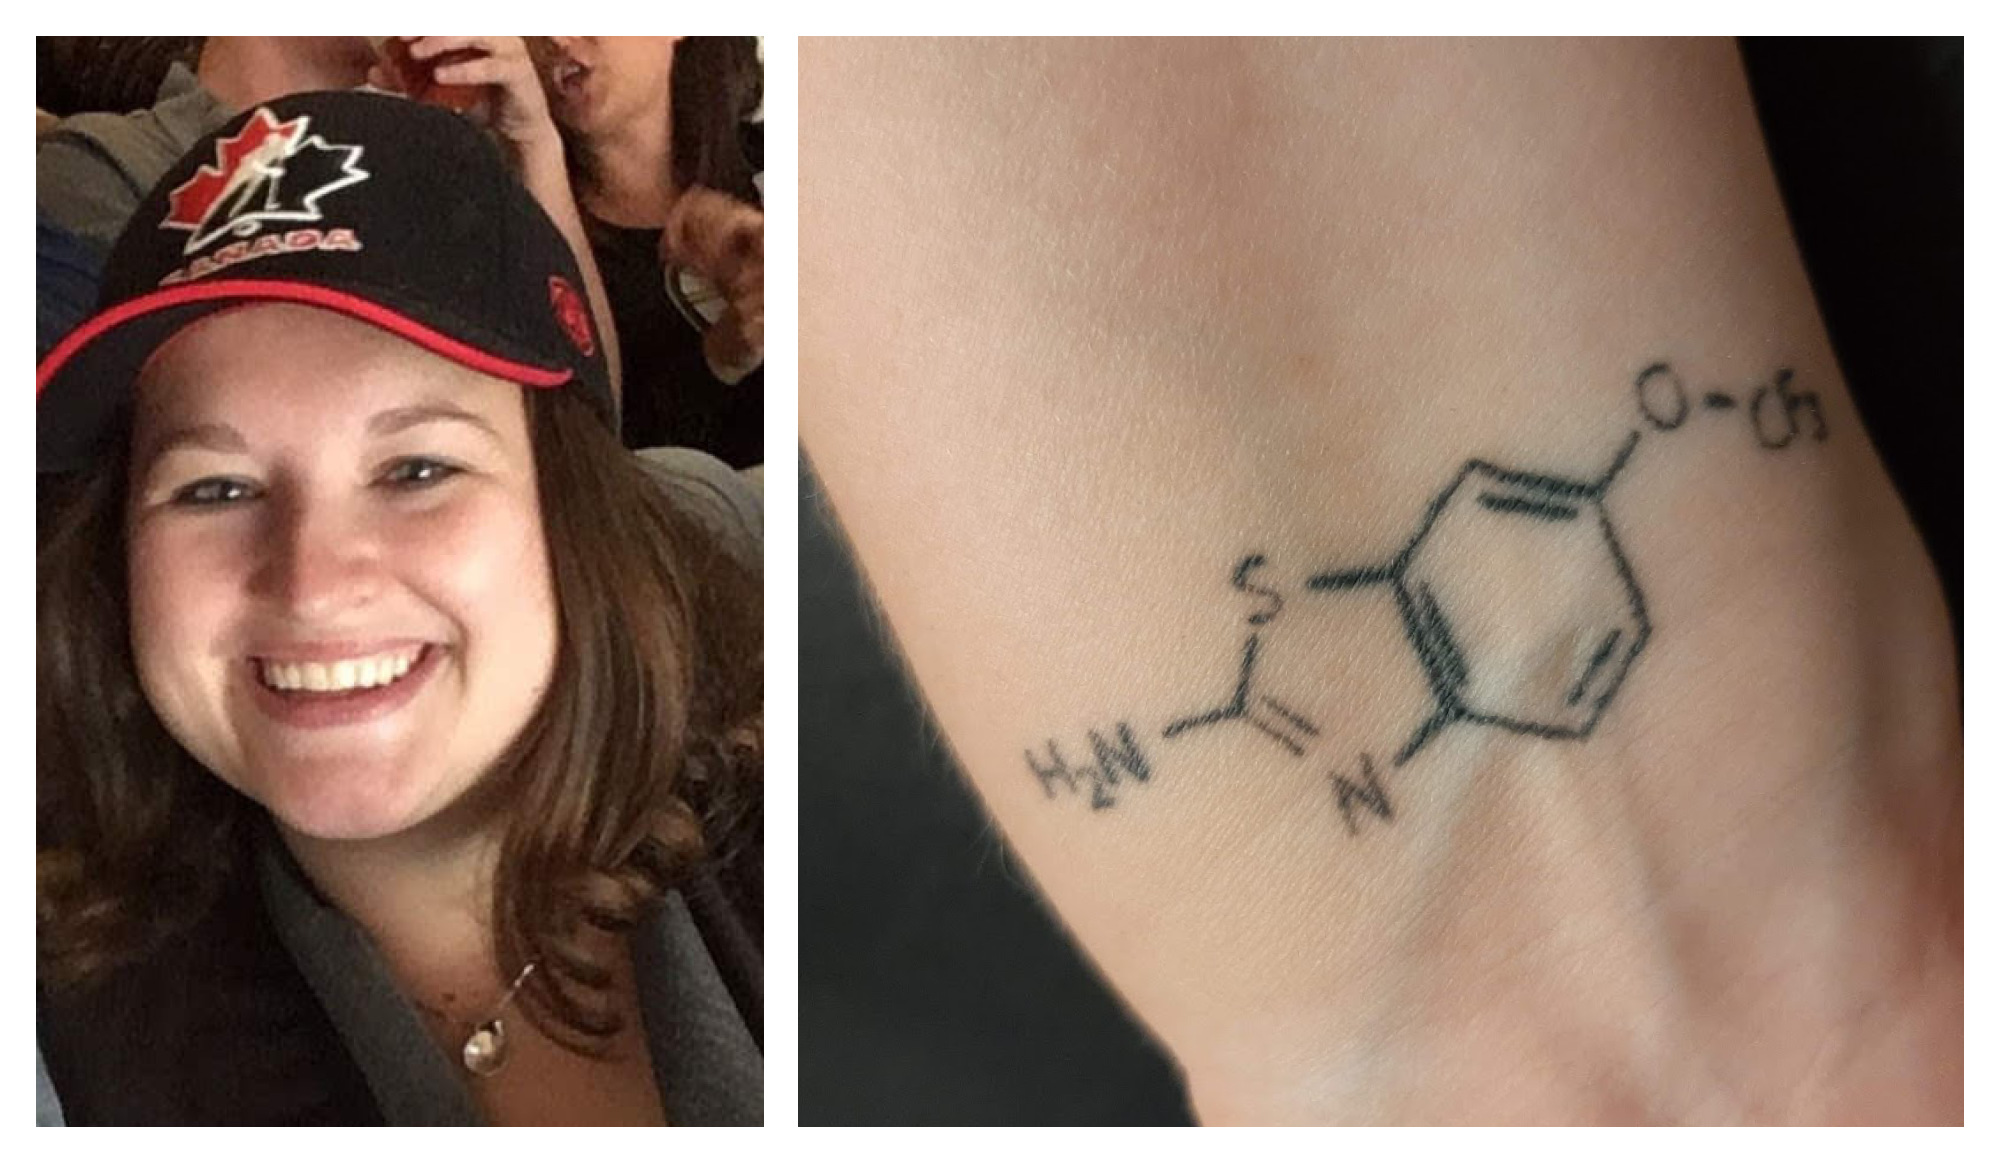 Photo collage of Lauren Mifflin and her tattoo of a chemical structure of riluzole, an ALS medication